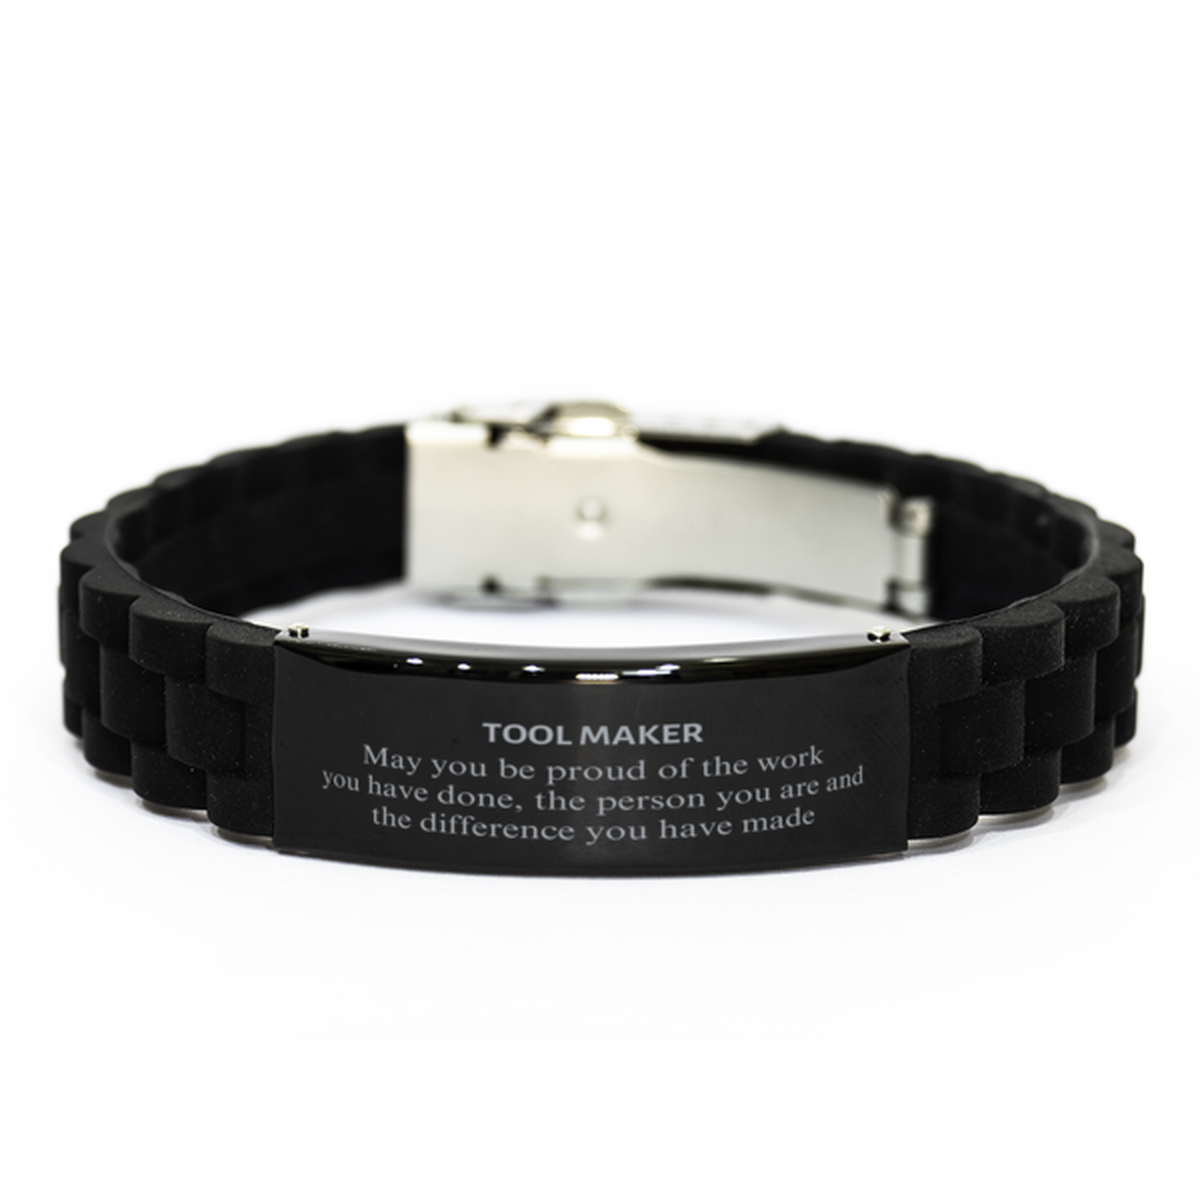 Tool Maker May you be proud of the work you have done, Retirement Tool Maker Black Glidelock Clasp Bracelet for Colleague Appreciation Gifts Amazing for Tool Maker